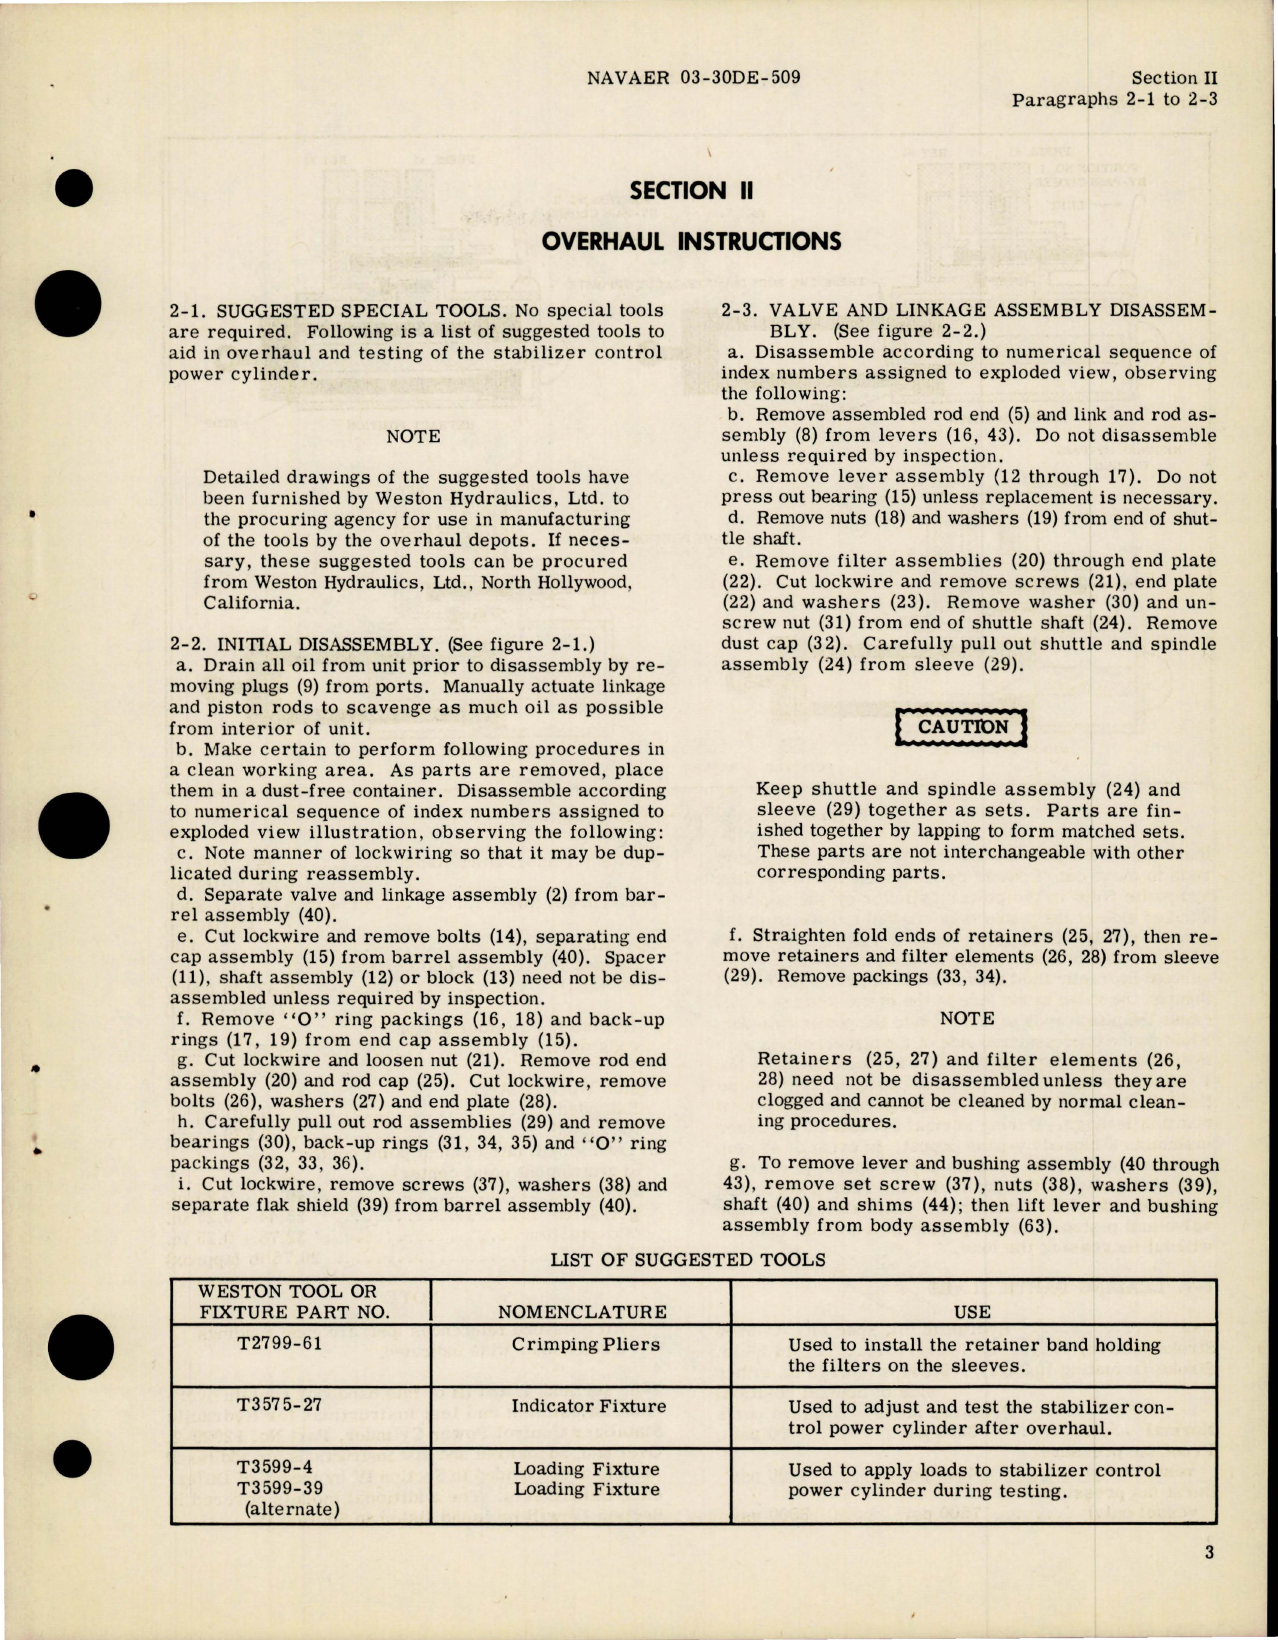 Sample page 5 from AirCorps Library document: Overhaul Instructions for Stabilizer Control Power Cylinders - Parts 12020-2 and 12490-1 